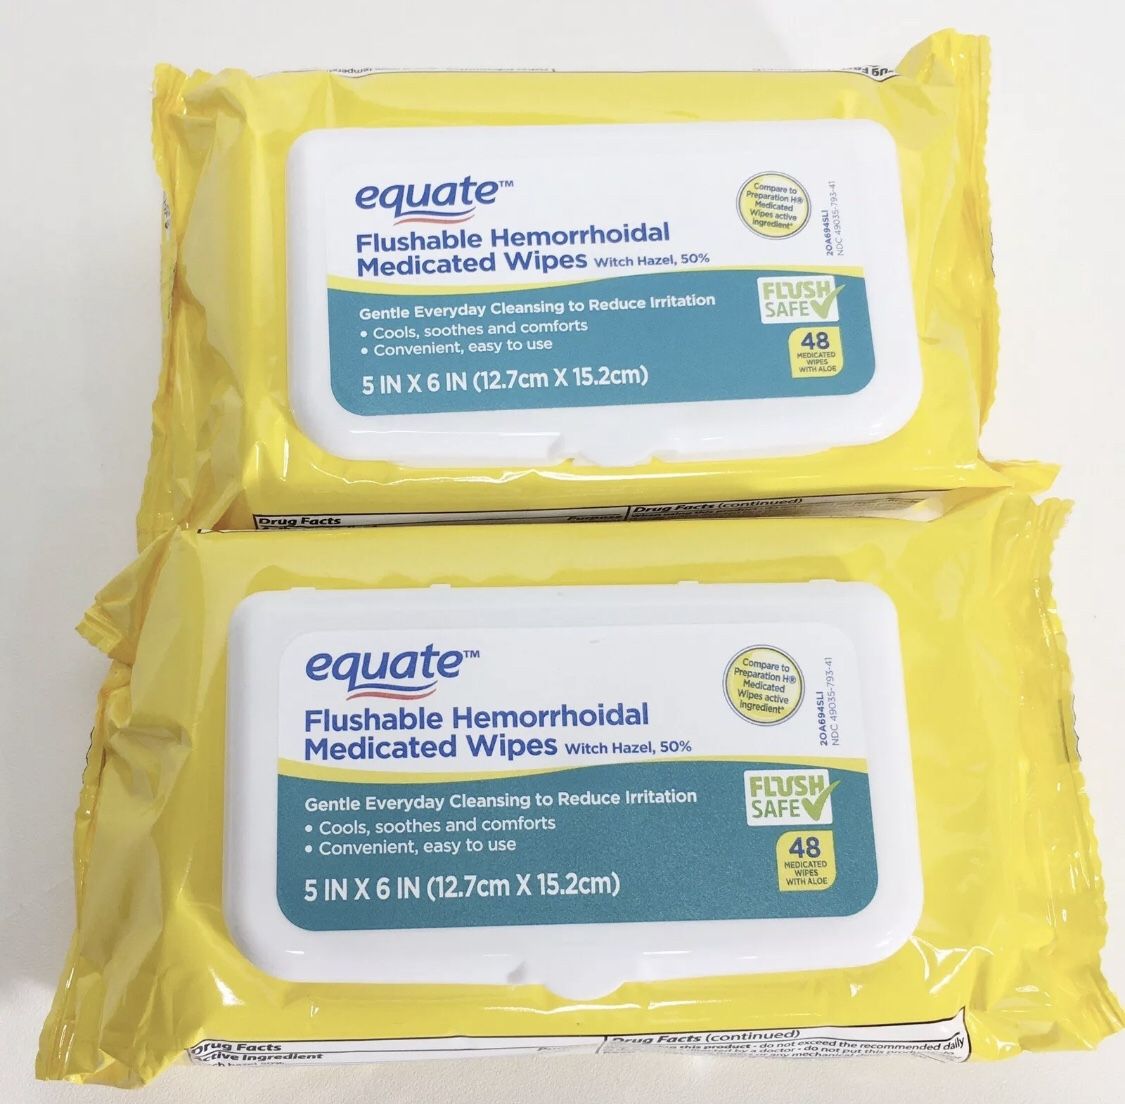 Equate Flushable Hemorrhoidal Medicated Wipes 48 ct  Exp 09/2023 Lot of 2 packs